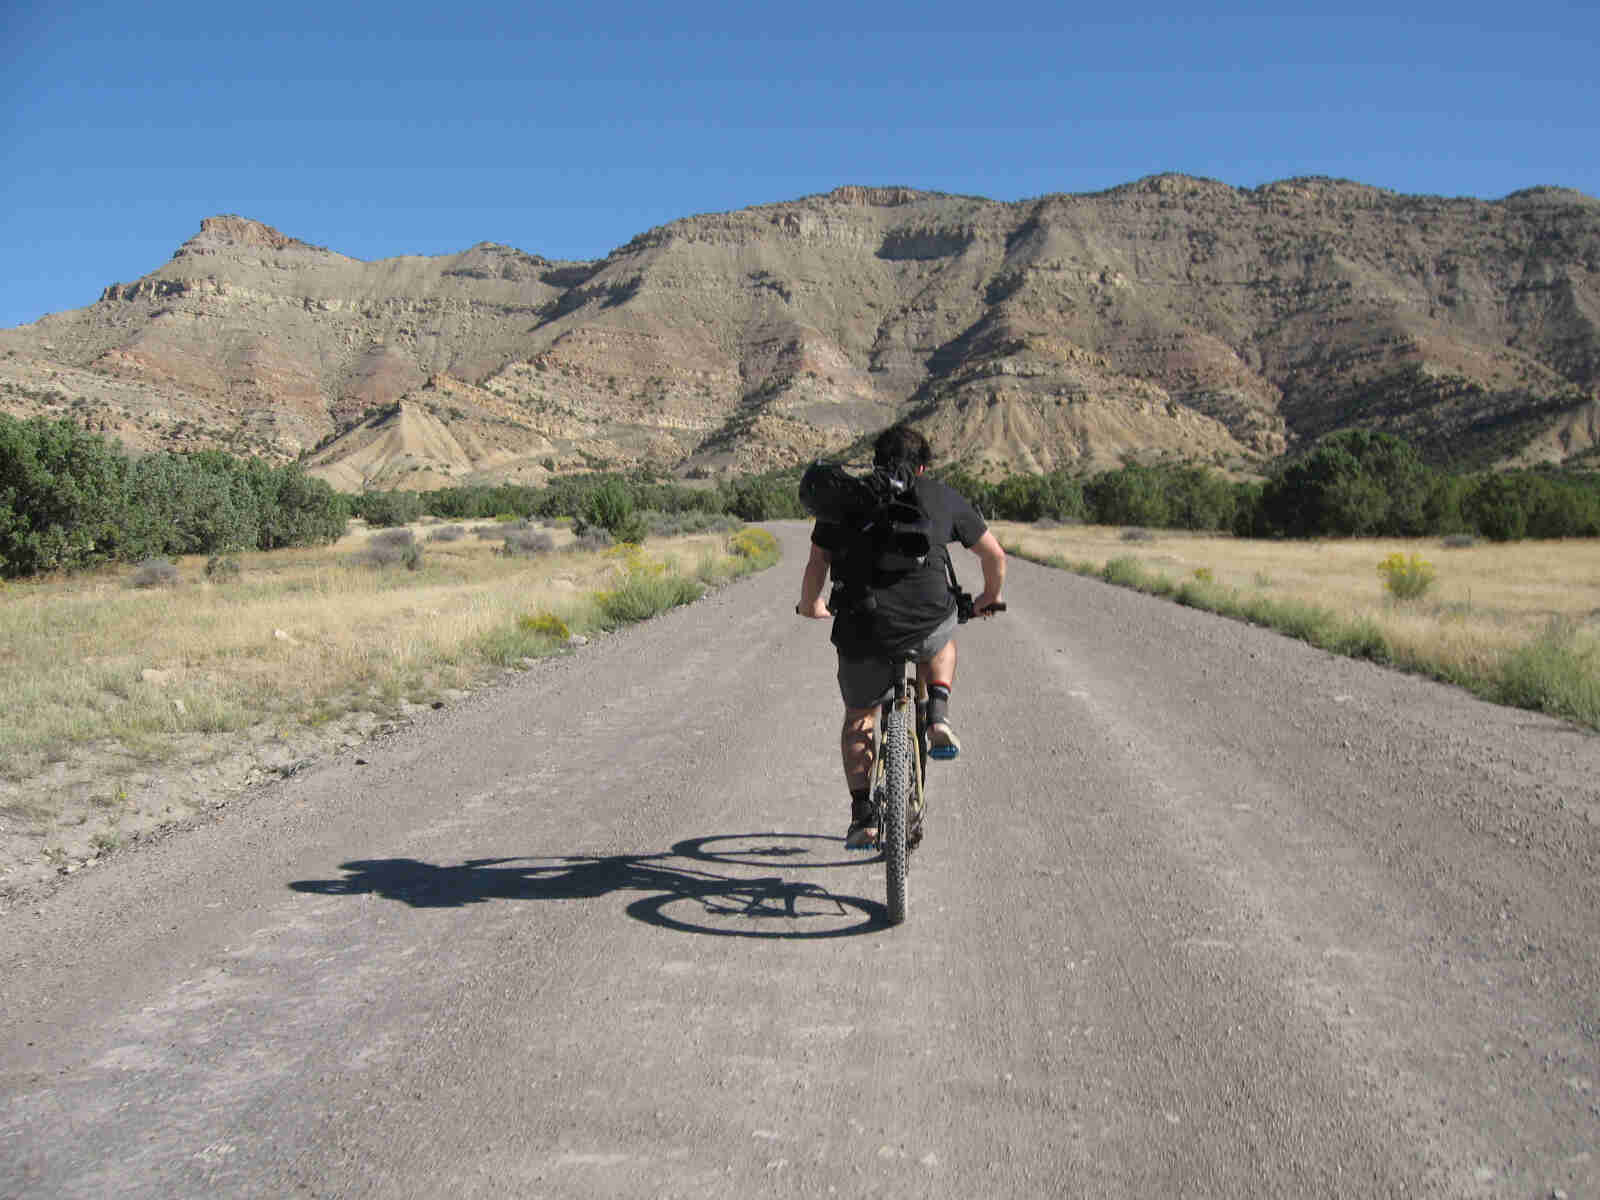 Right view of a cyclist, riding a Surly bike straight away, on a gravel road with fields on the side and mountains ahead